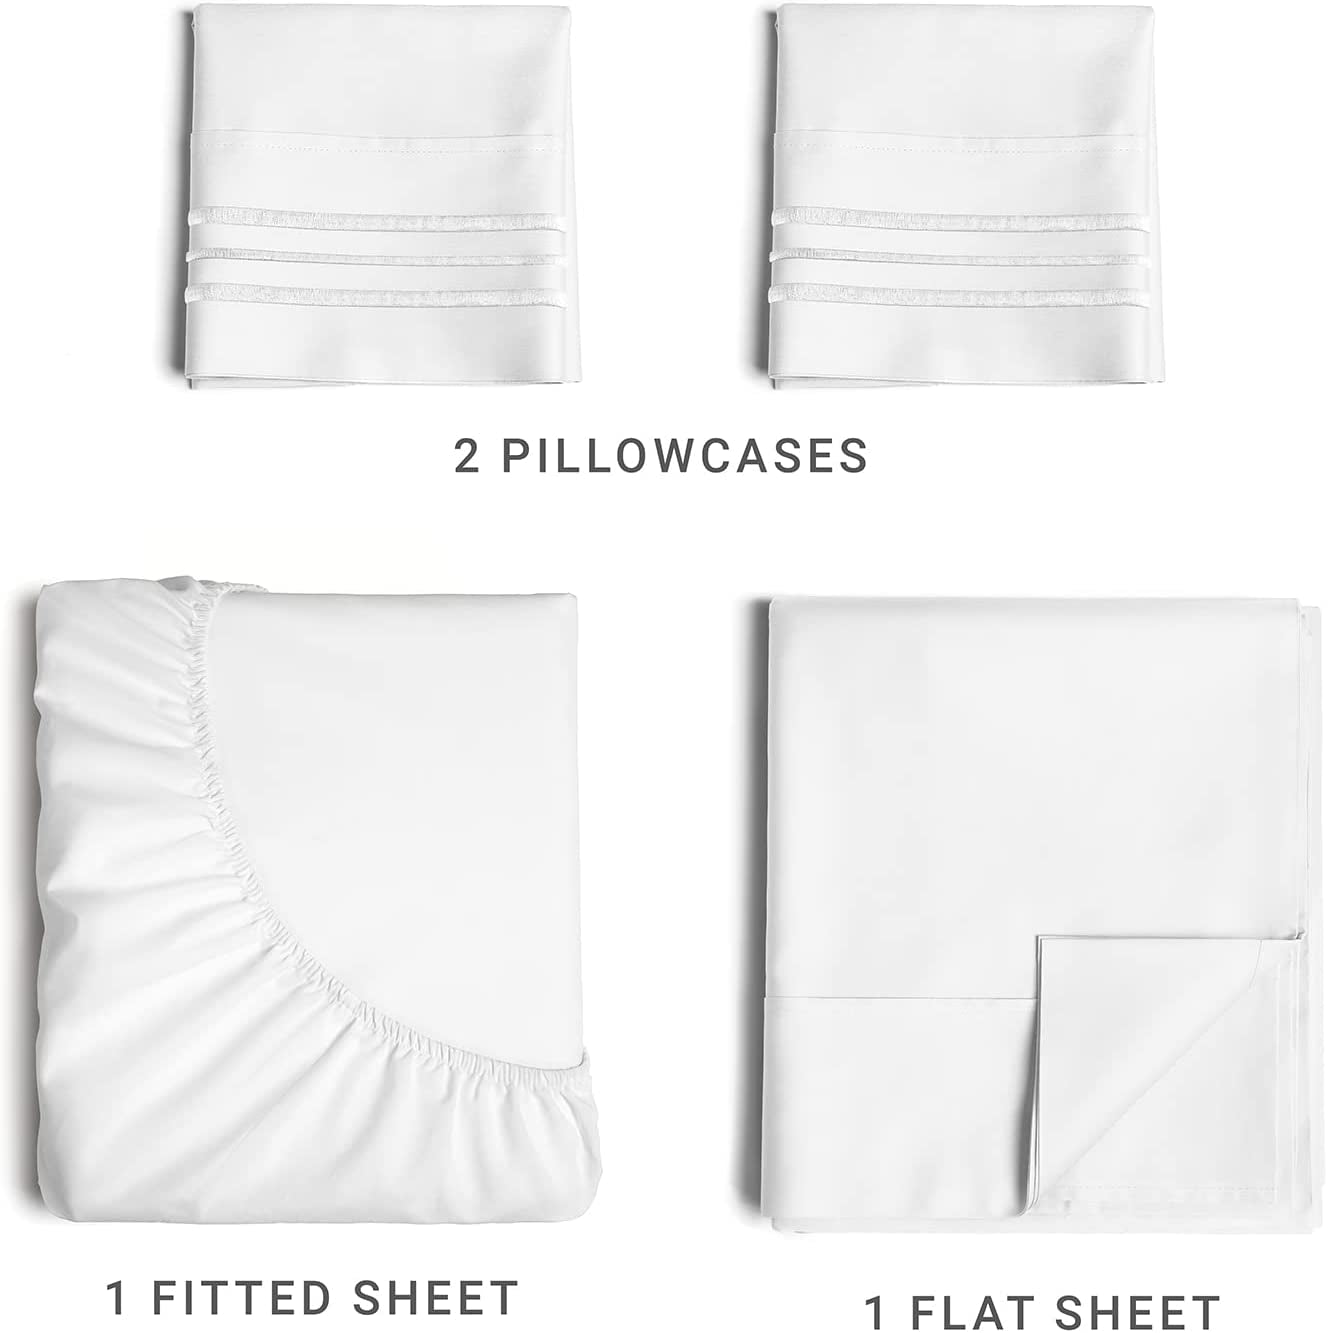 Queen Size Breathable & Cooling Microfiber Sheet Set